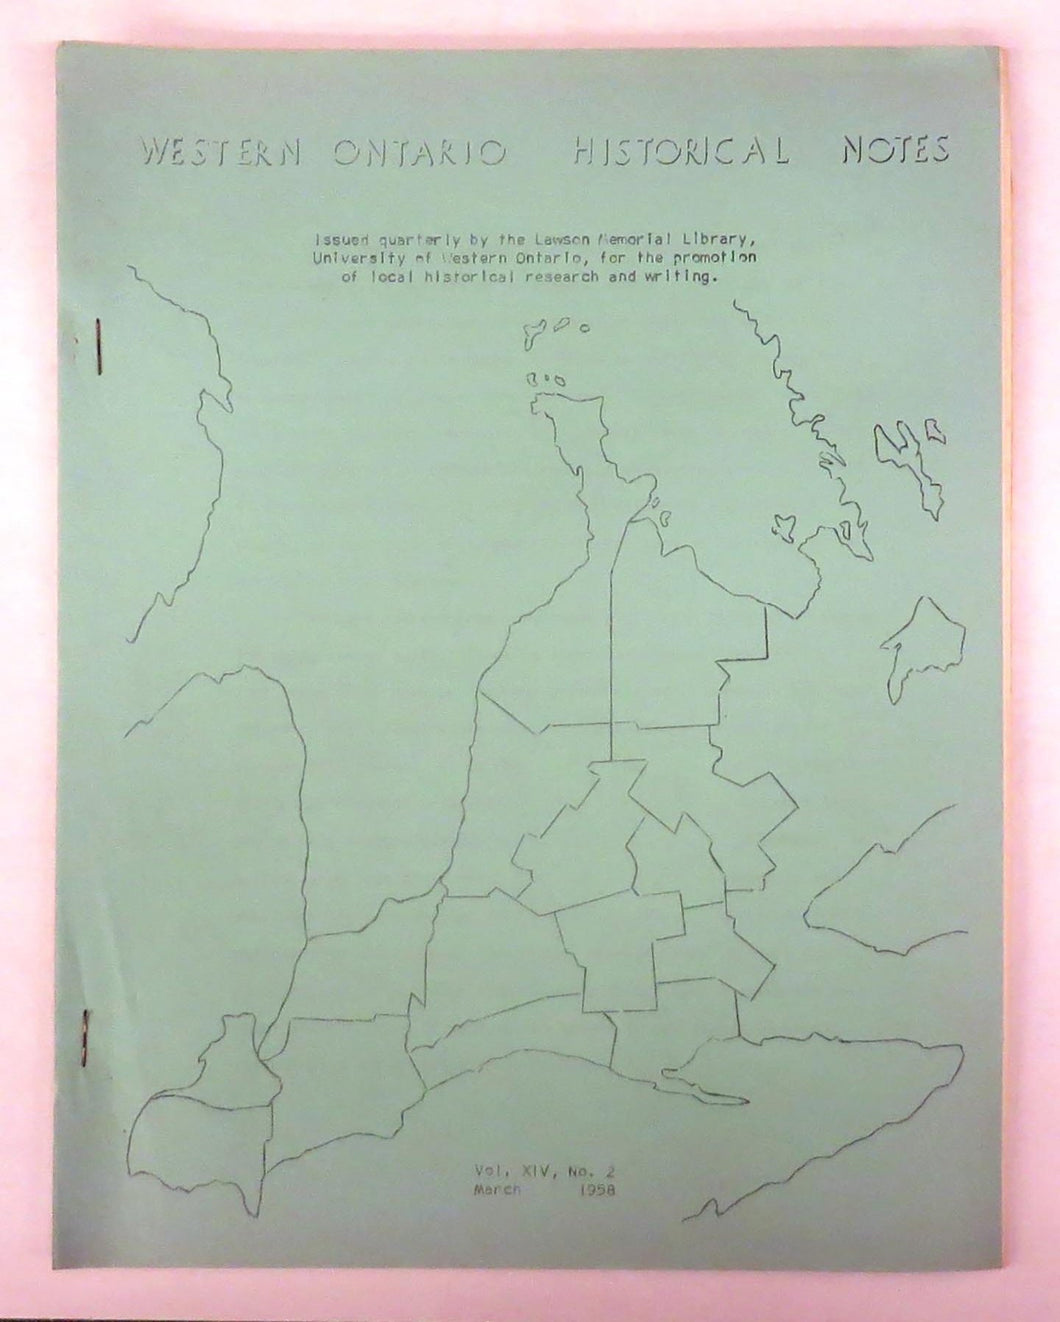 Western Ontario Historical Notes March 1958